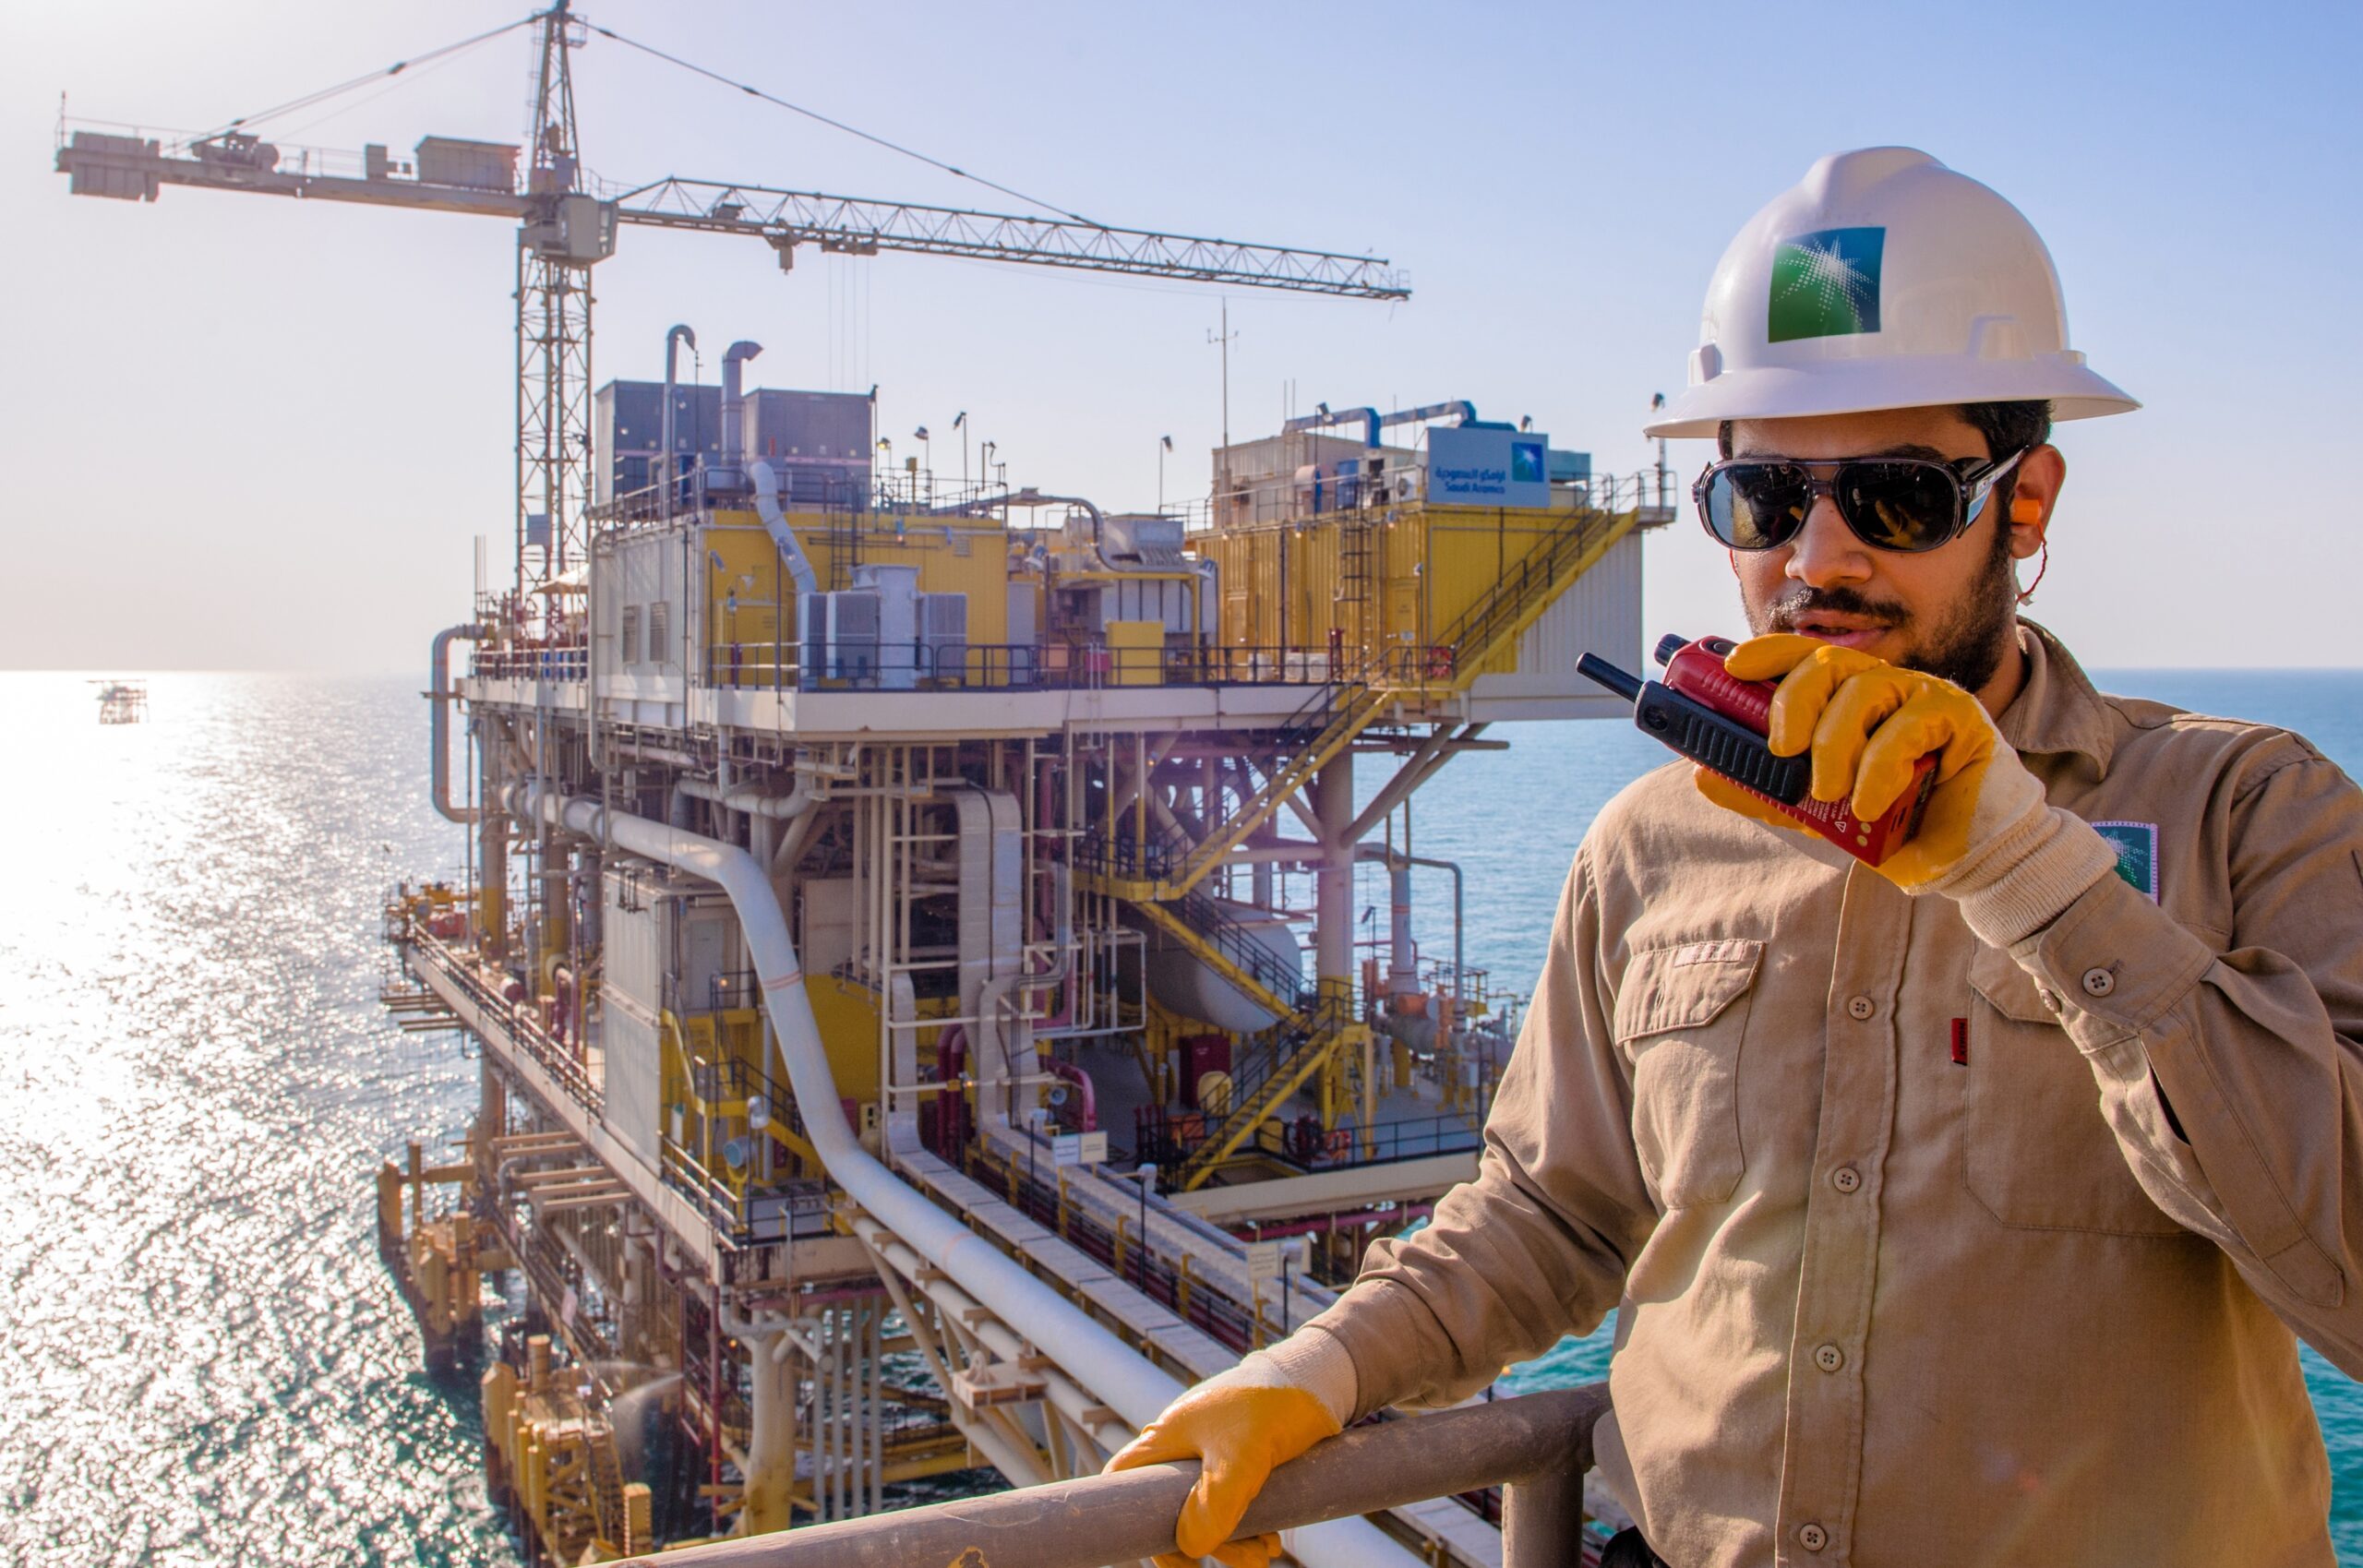 Aramco says its resilience and agility contributed to healthy cash flows and profitability